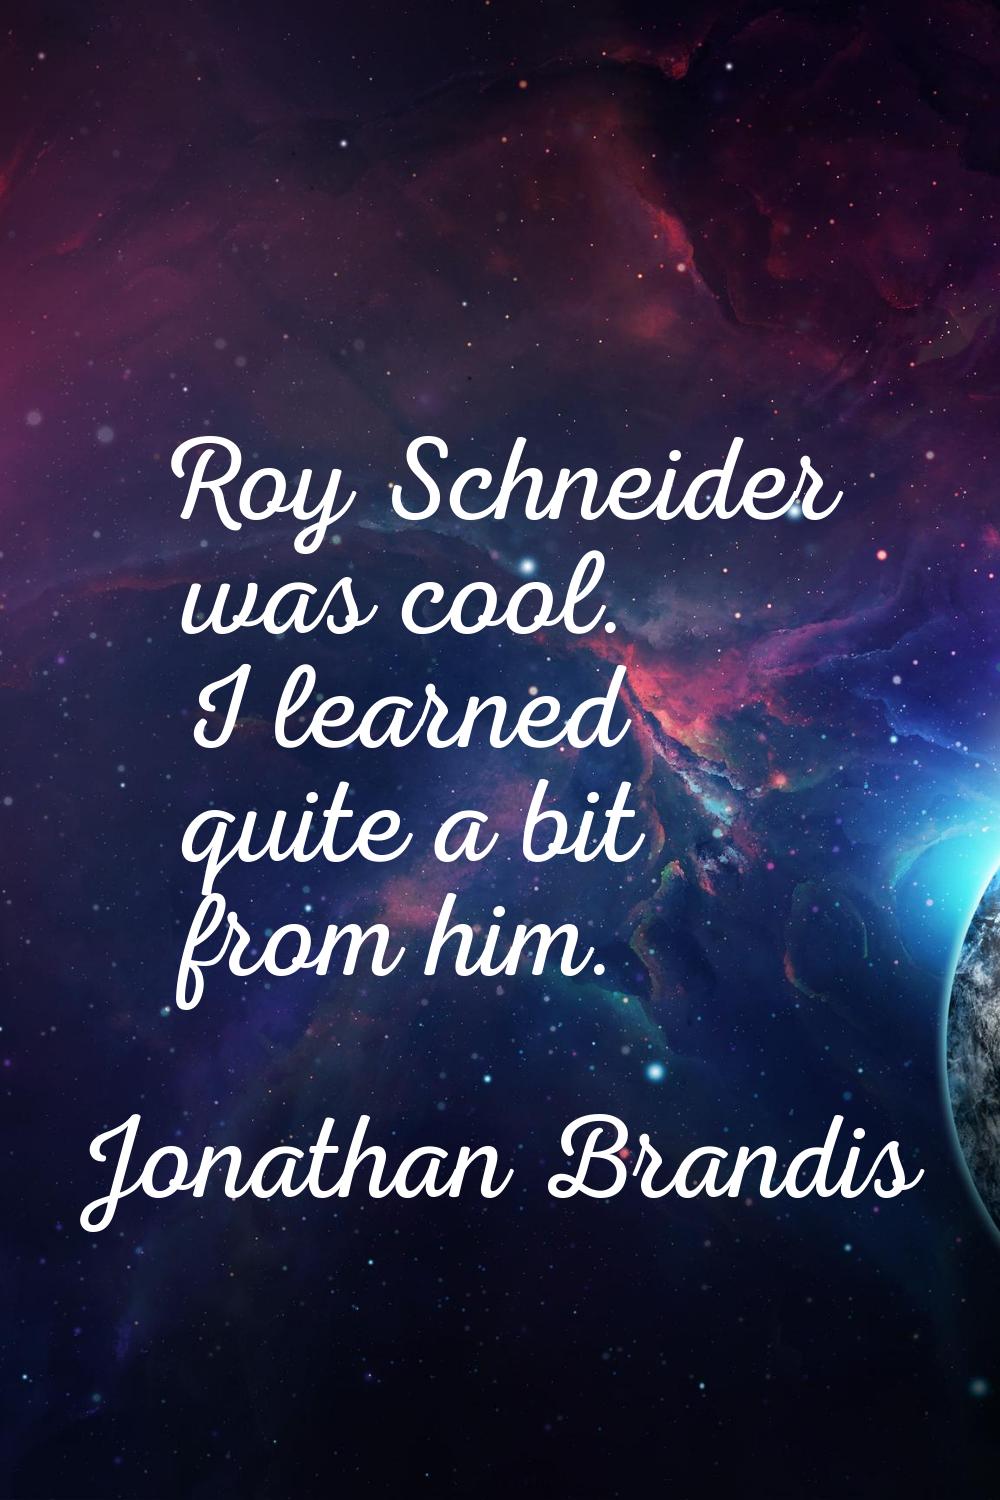 Roy Schneider was cool. I learned quite a bit from him.